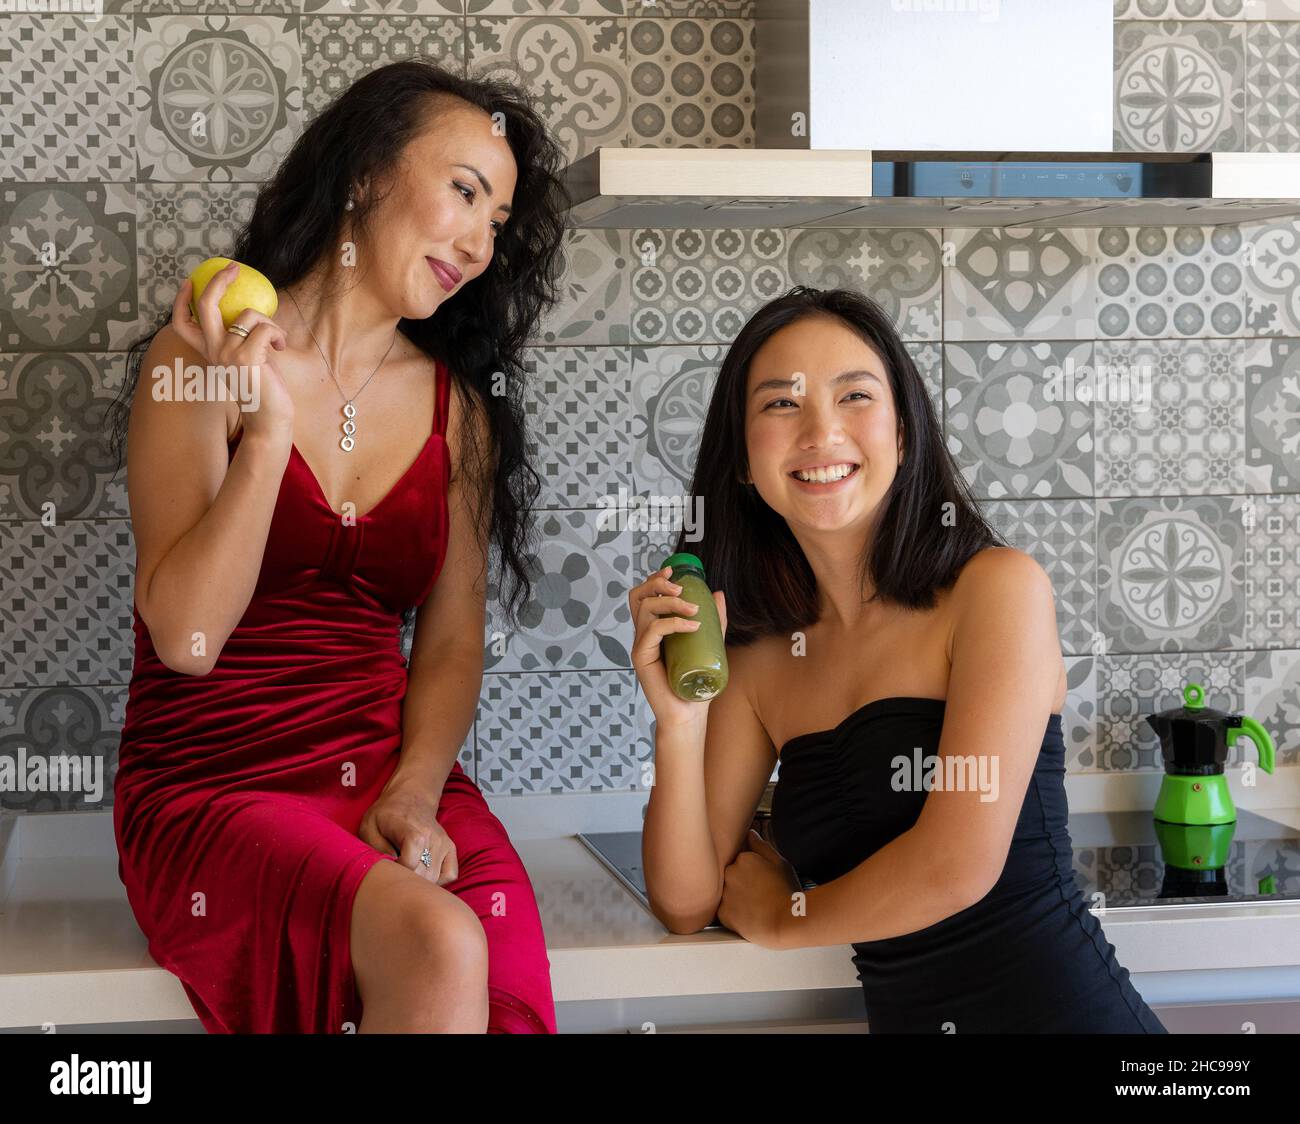 two women enjoying their time having a snack in the kitchen, well-dressed in formal clothes Stock Photo